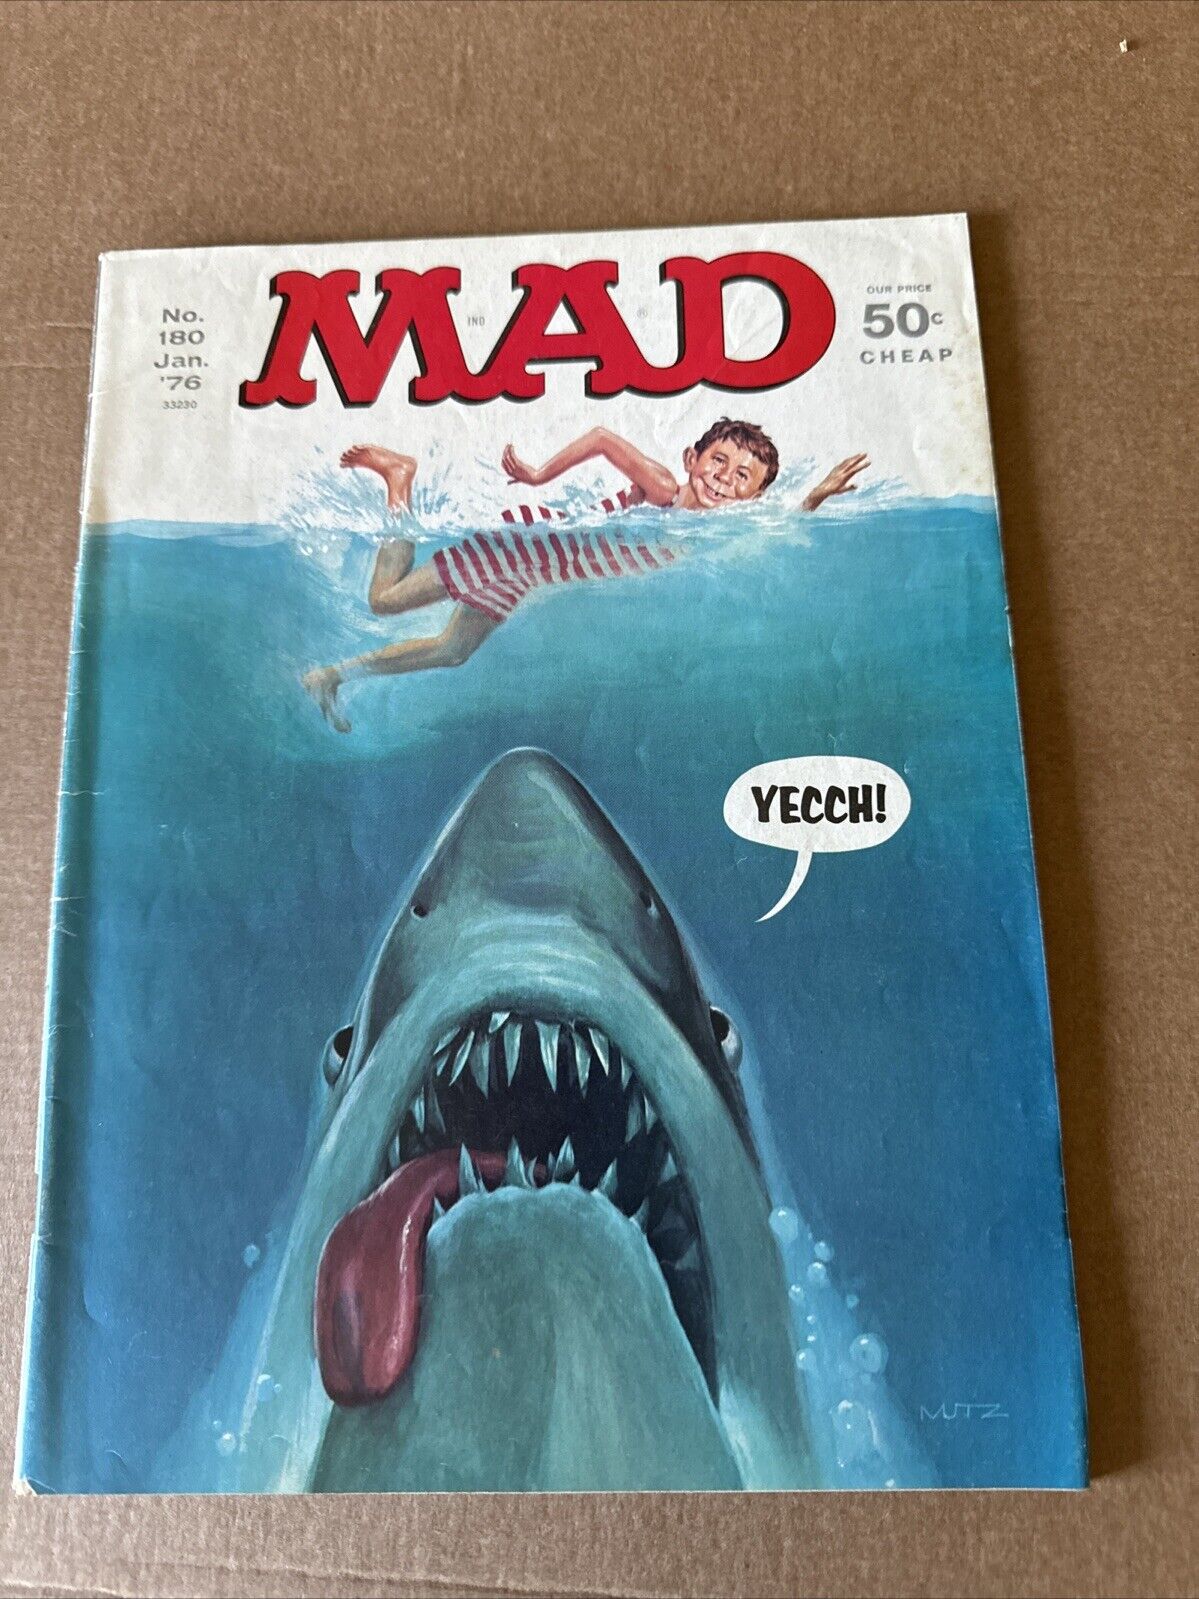 Mad Magazine #180 Jaws Movie Jan 1976 Very Good shipping included